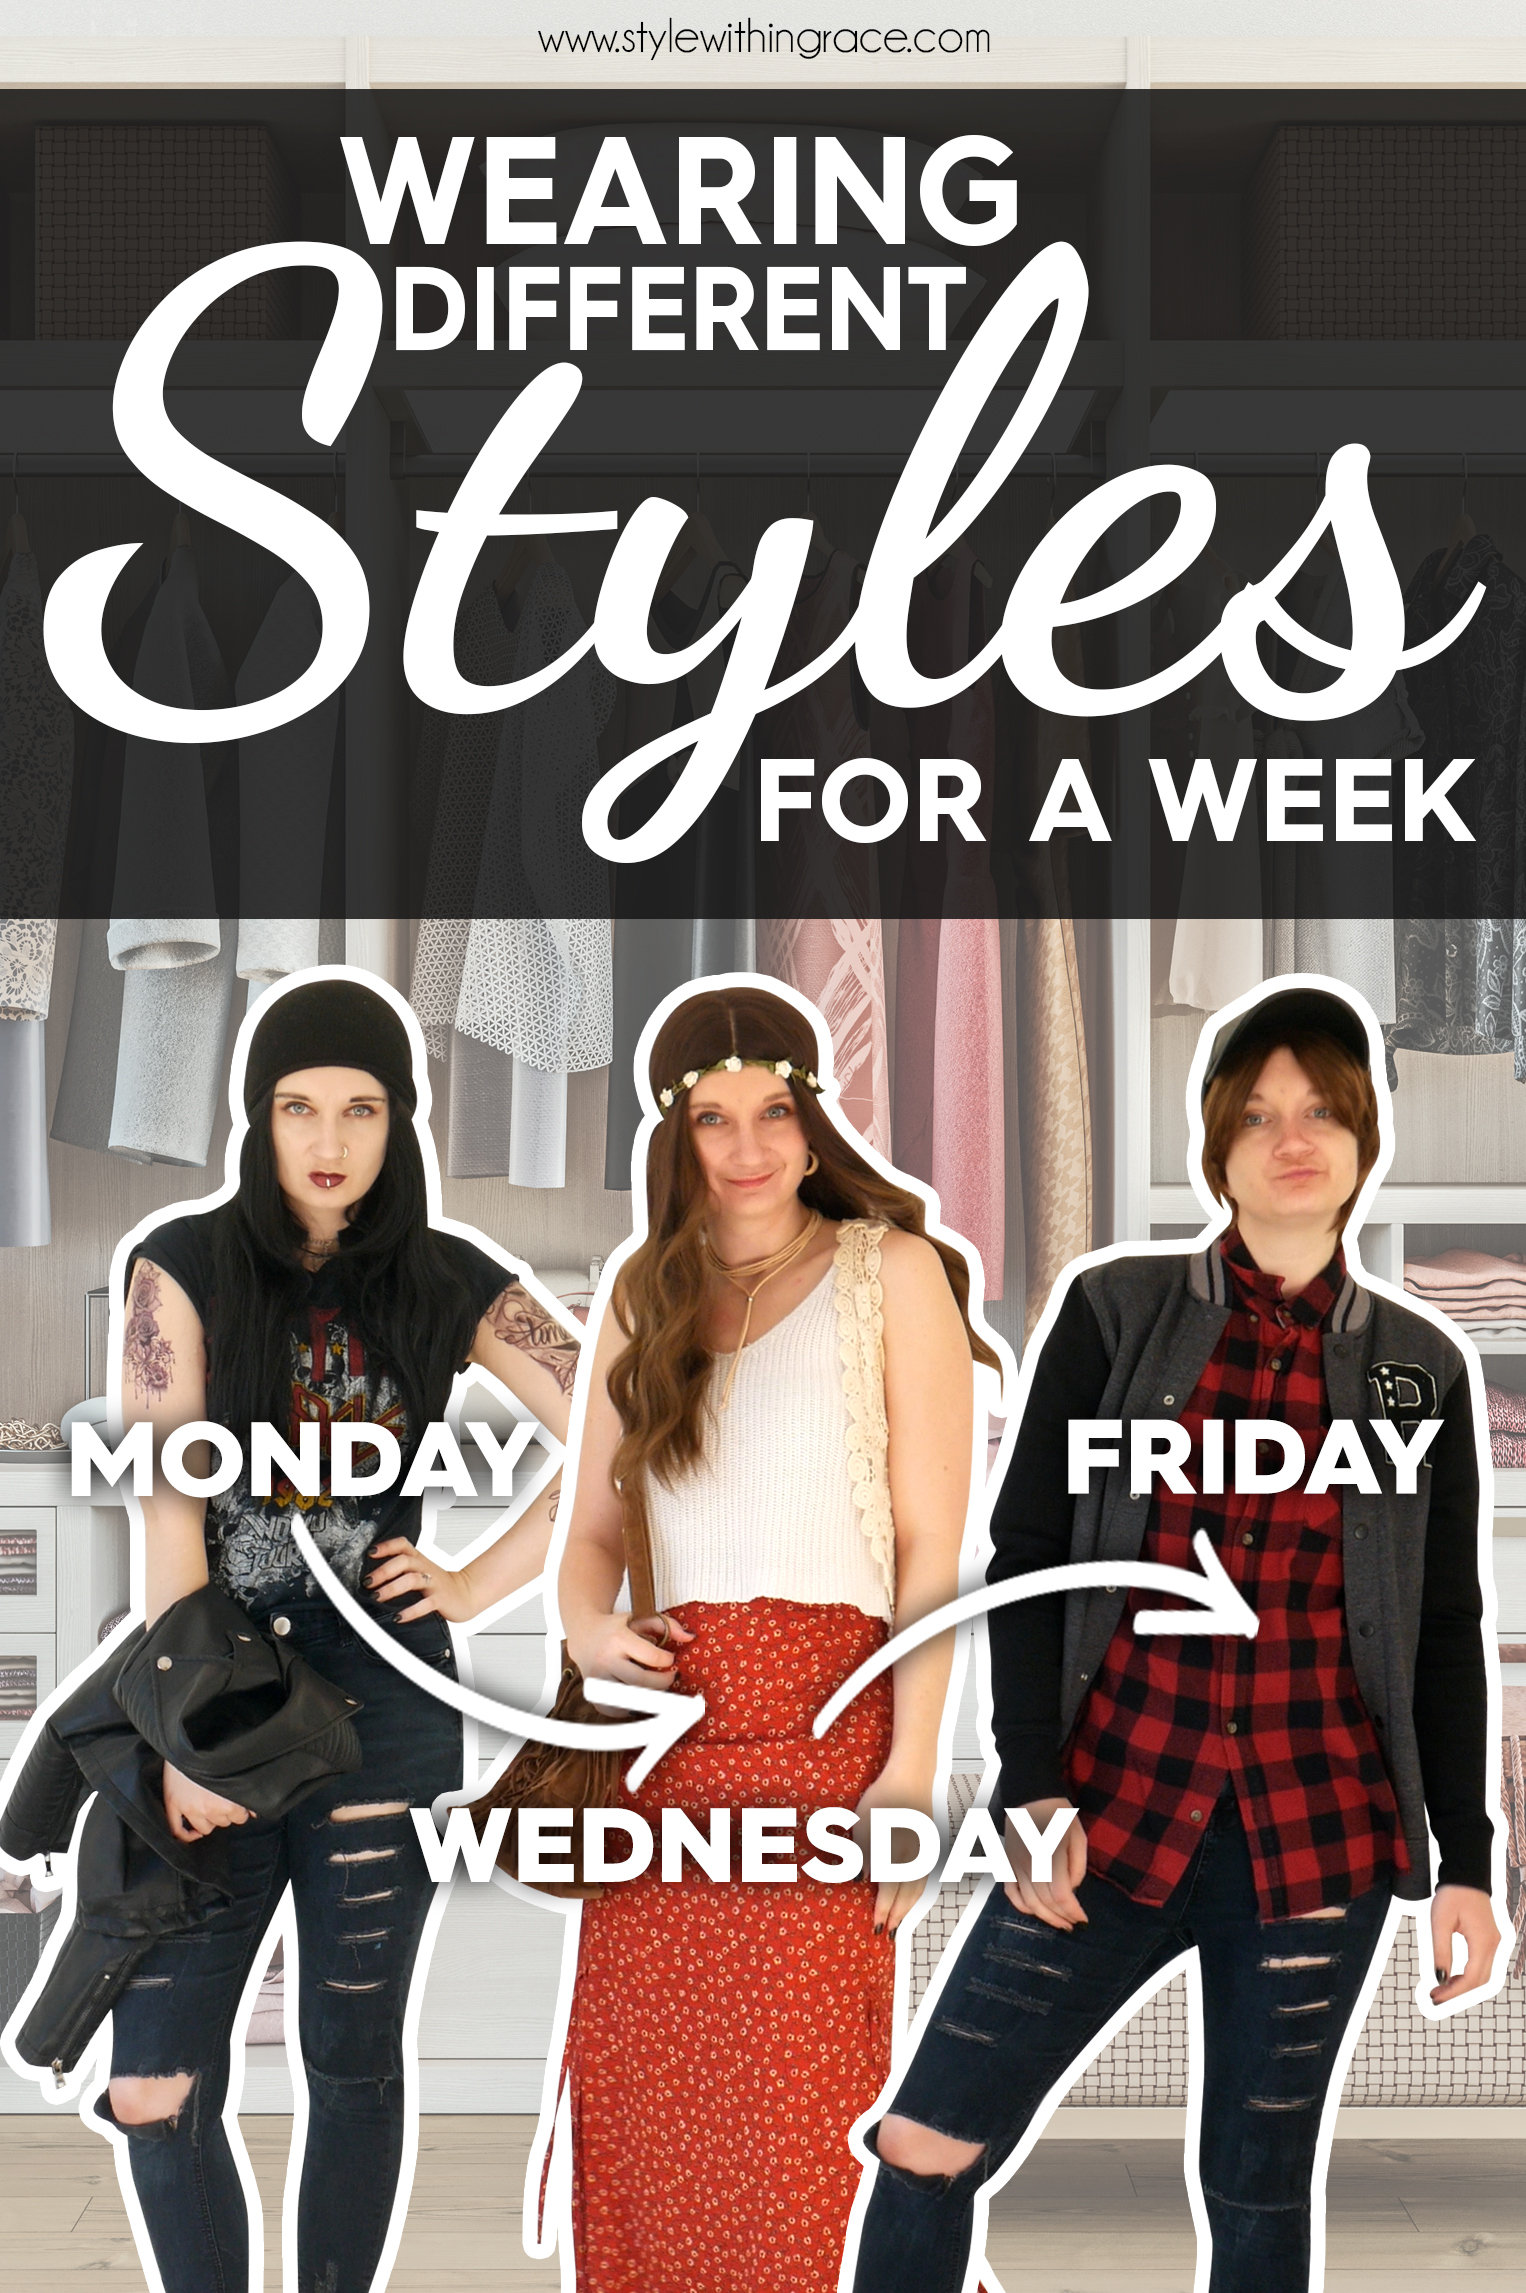 Wearing Different Styles for a Week Pinterest